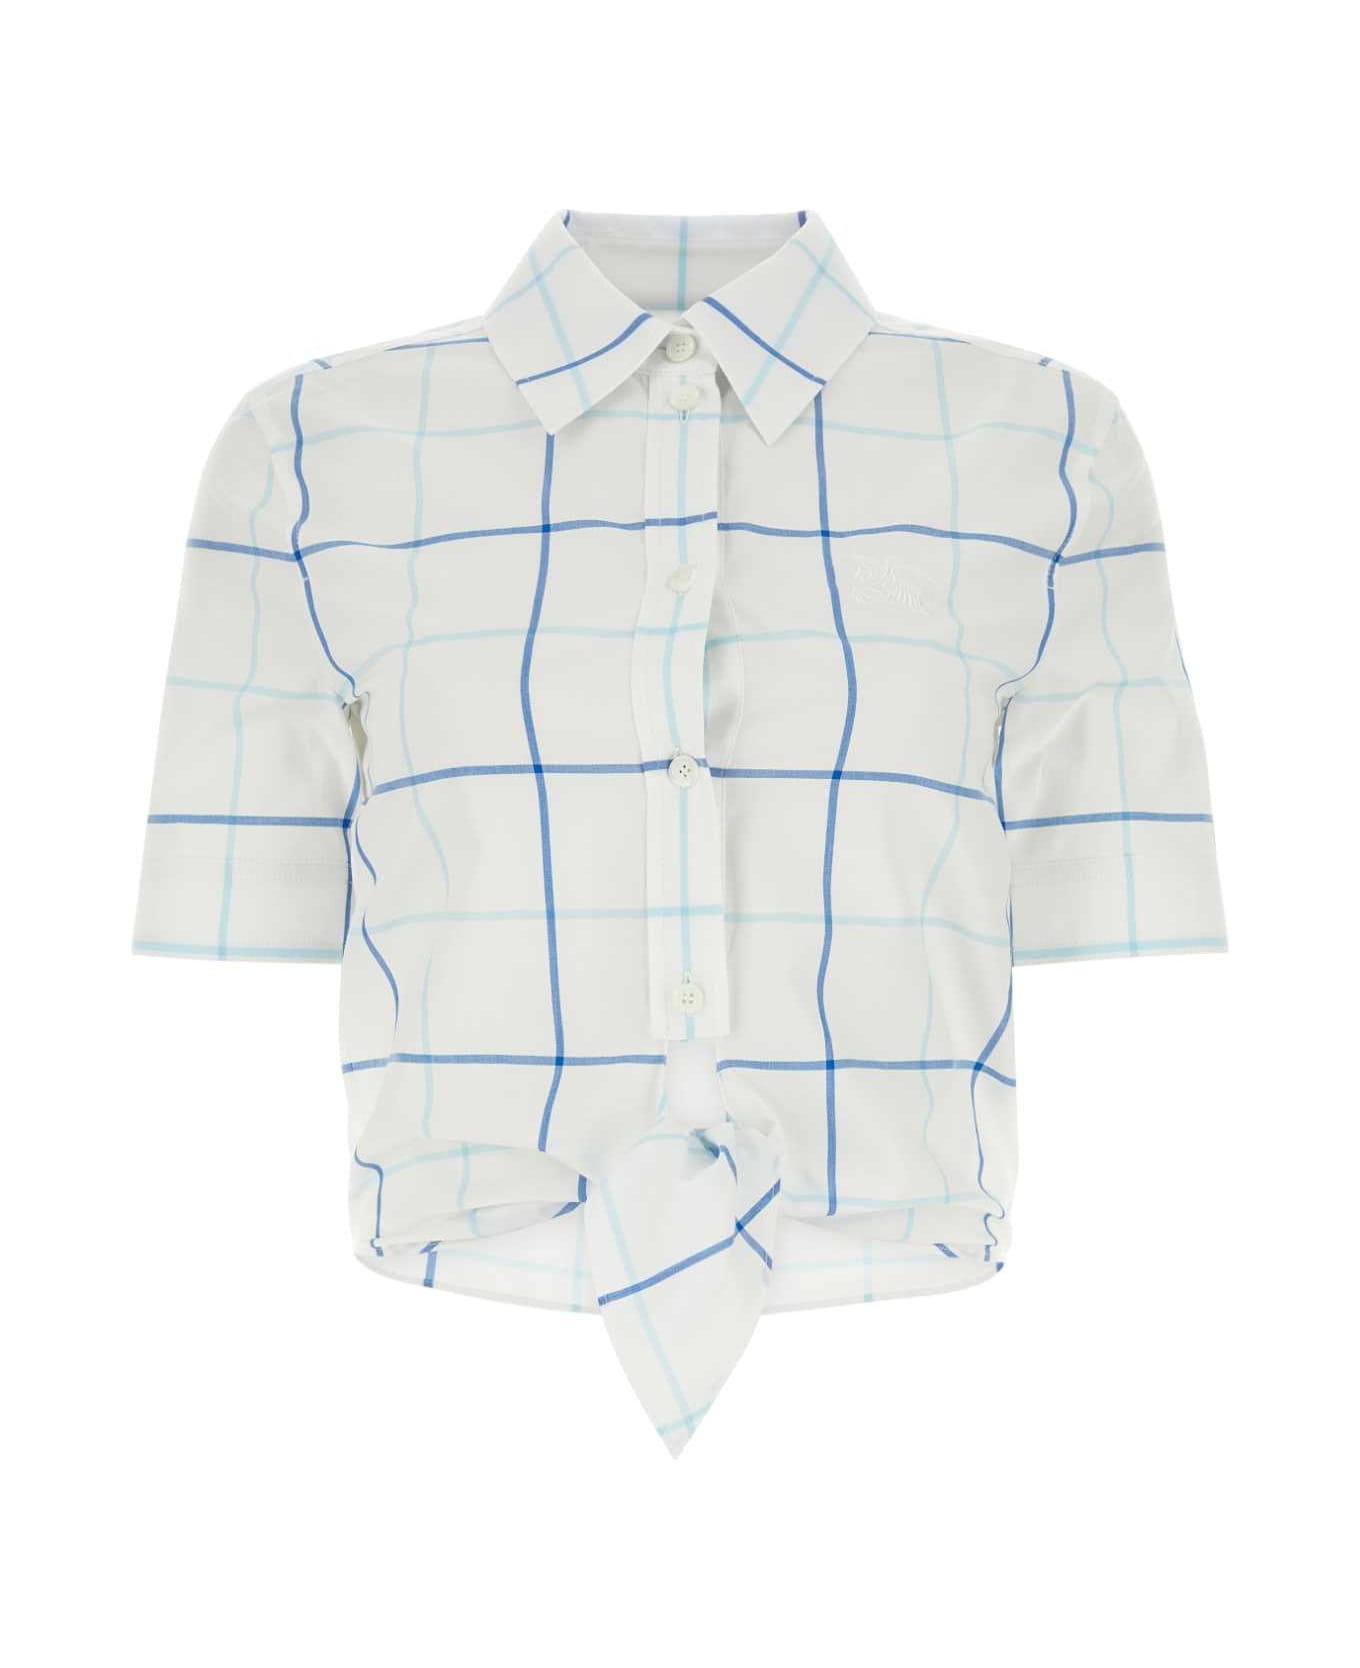 Burberry Embroidered Poplin Shirt - BRTCERULEANBLUEIP シャツ